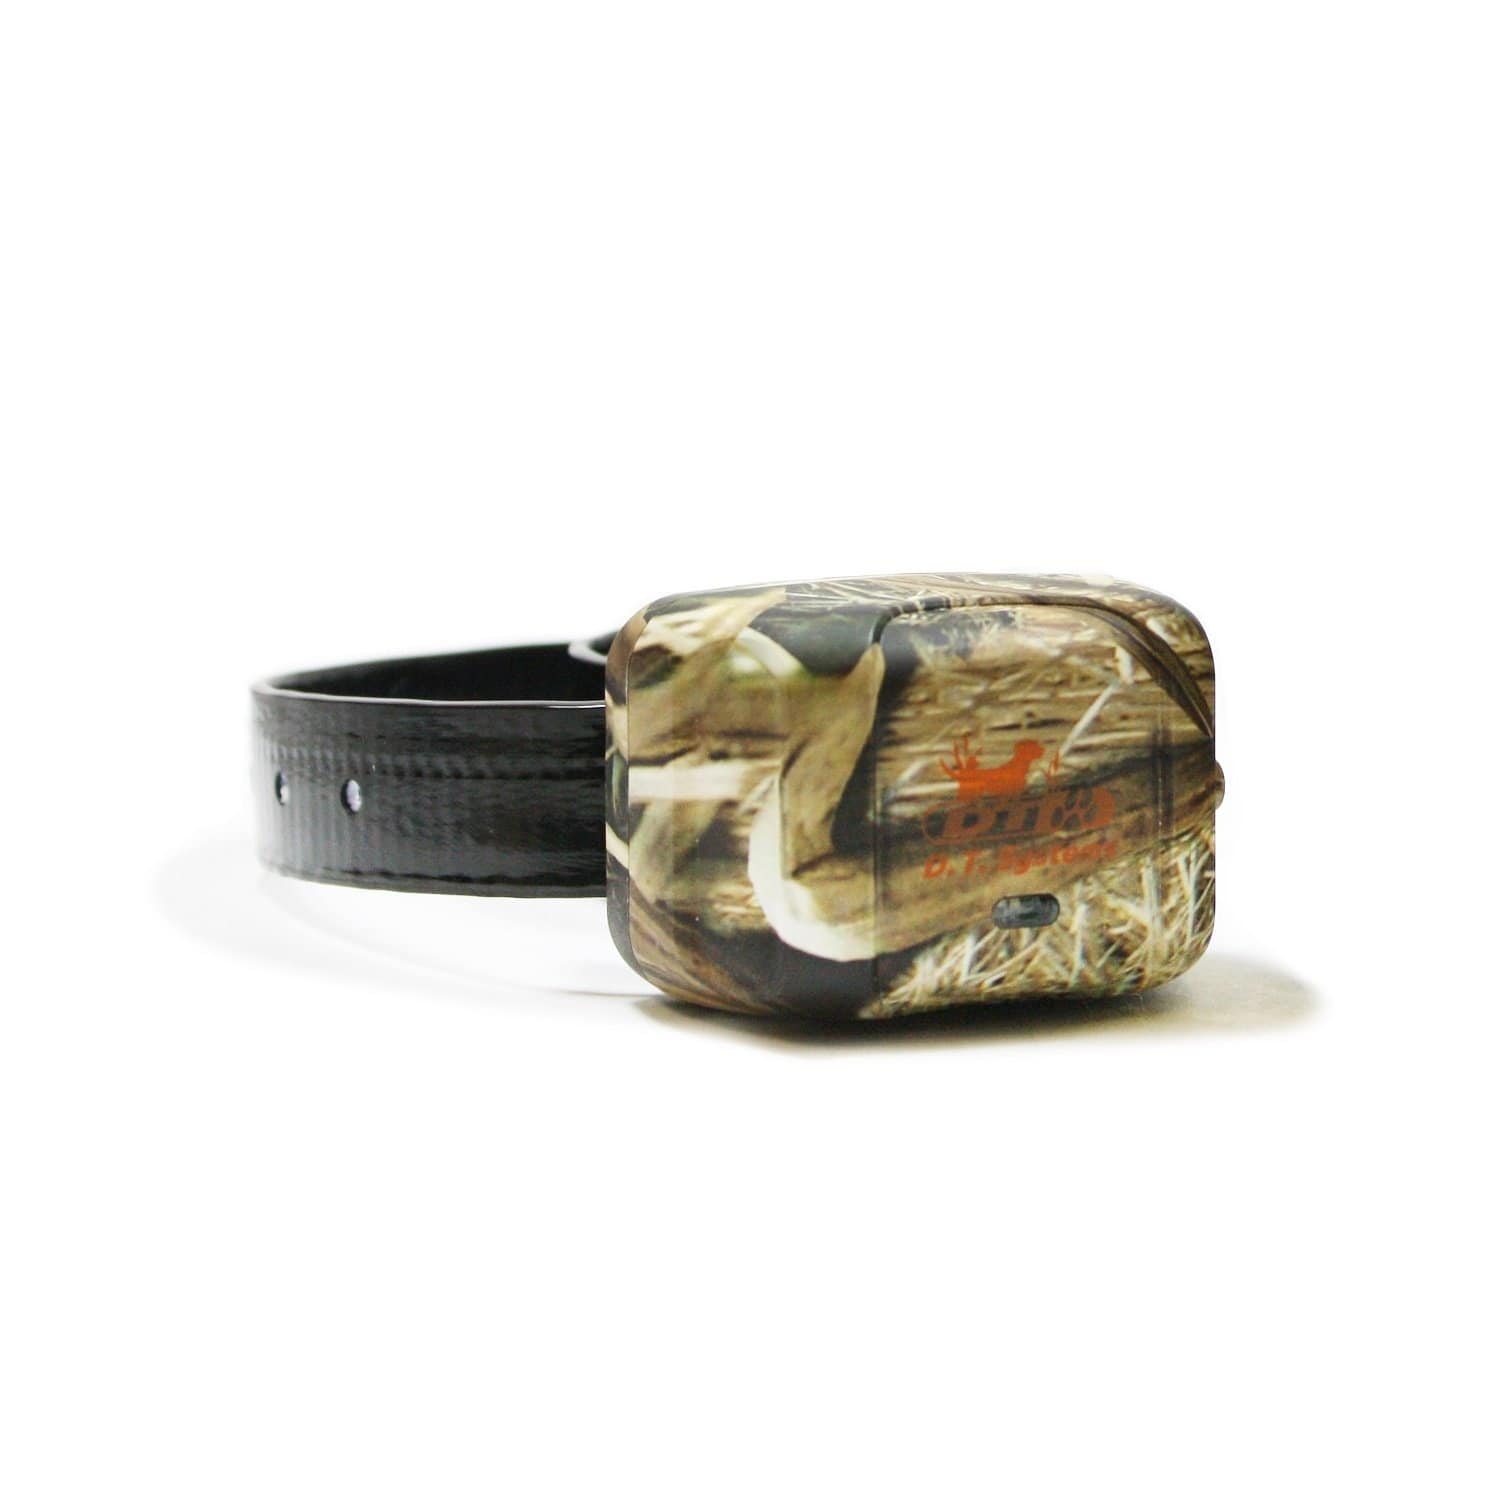 D.T. Systems Gifts & Novelty : Pets D.T. Systems Add-On Collar Receiver for MR 1100 Camo